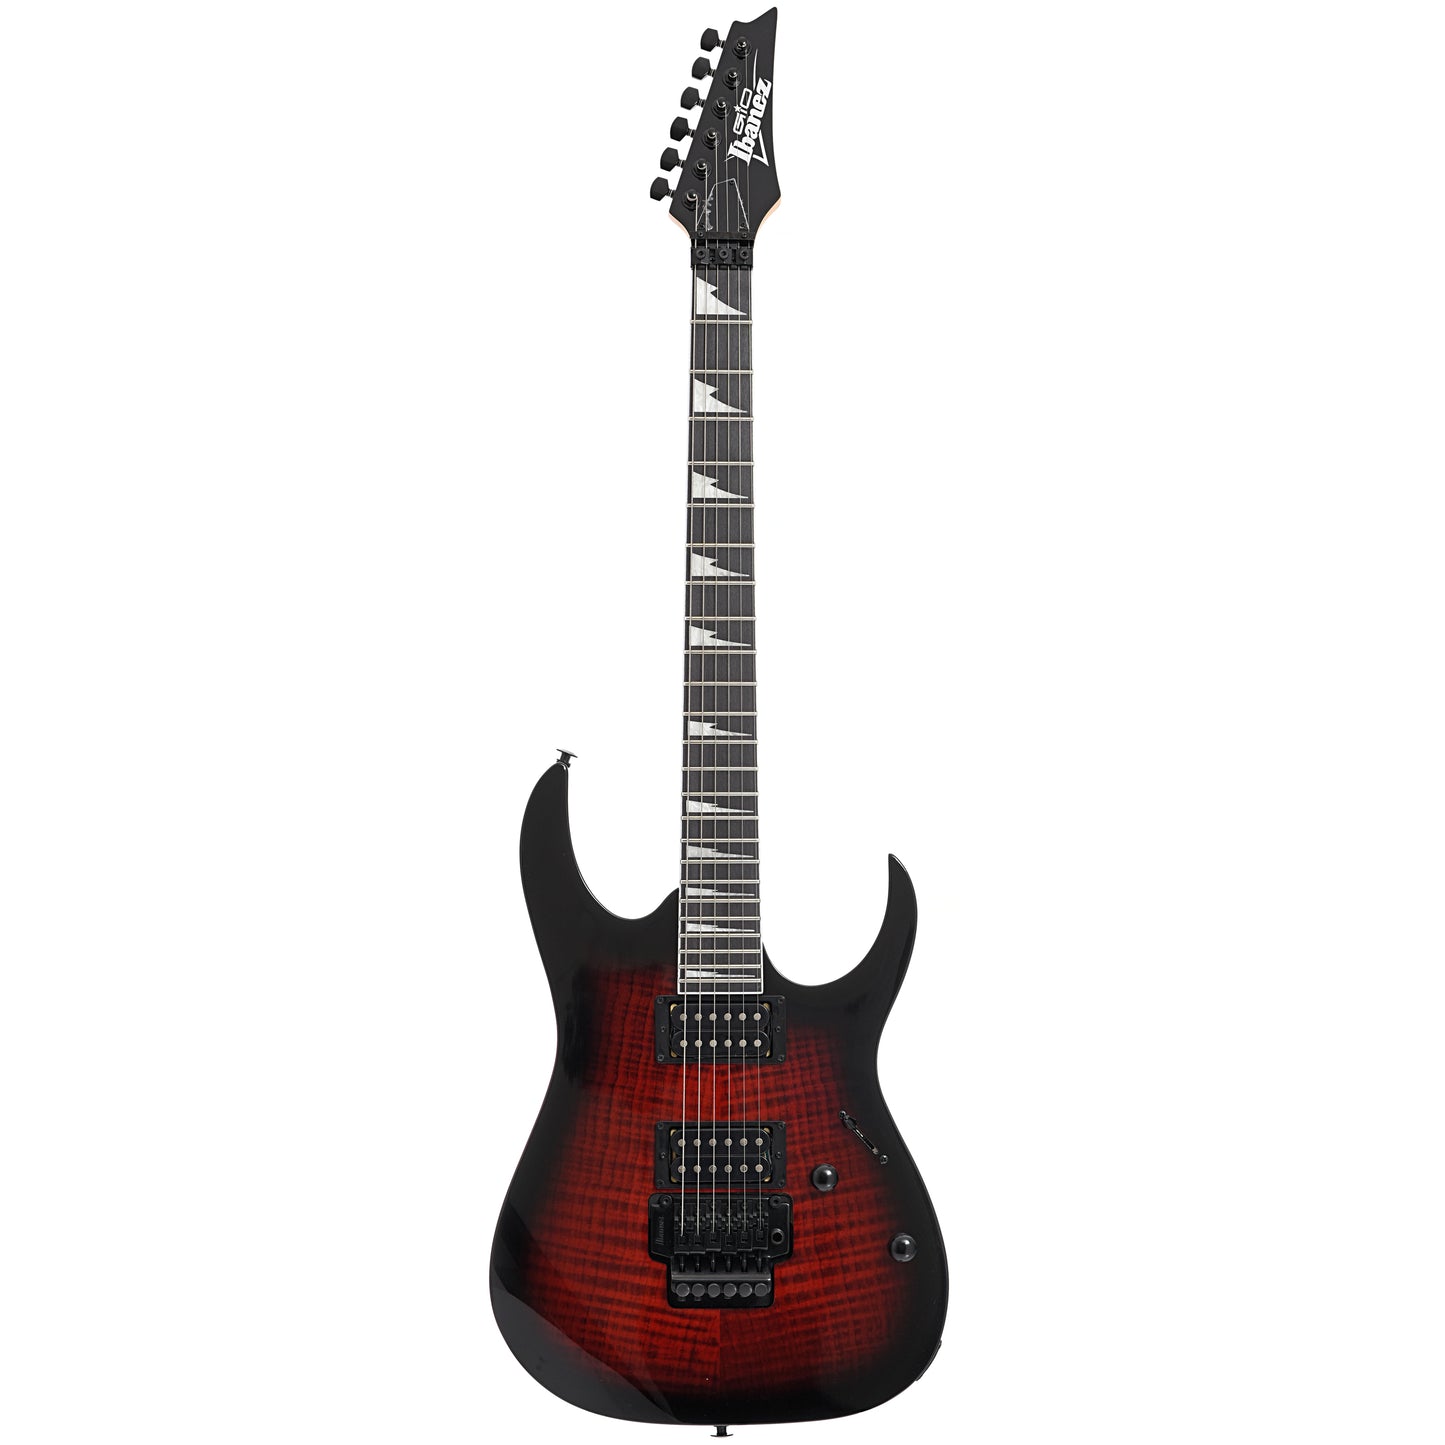 Full Front of Ibanez Gio GRG320FA Electric Guitar, Transparent Red Burst